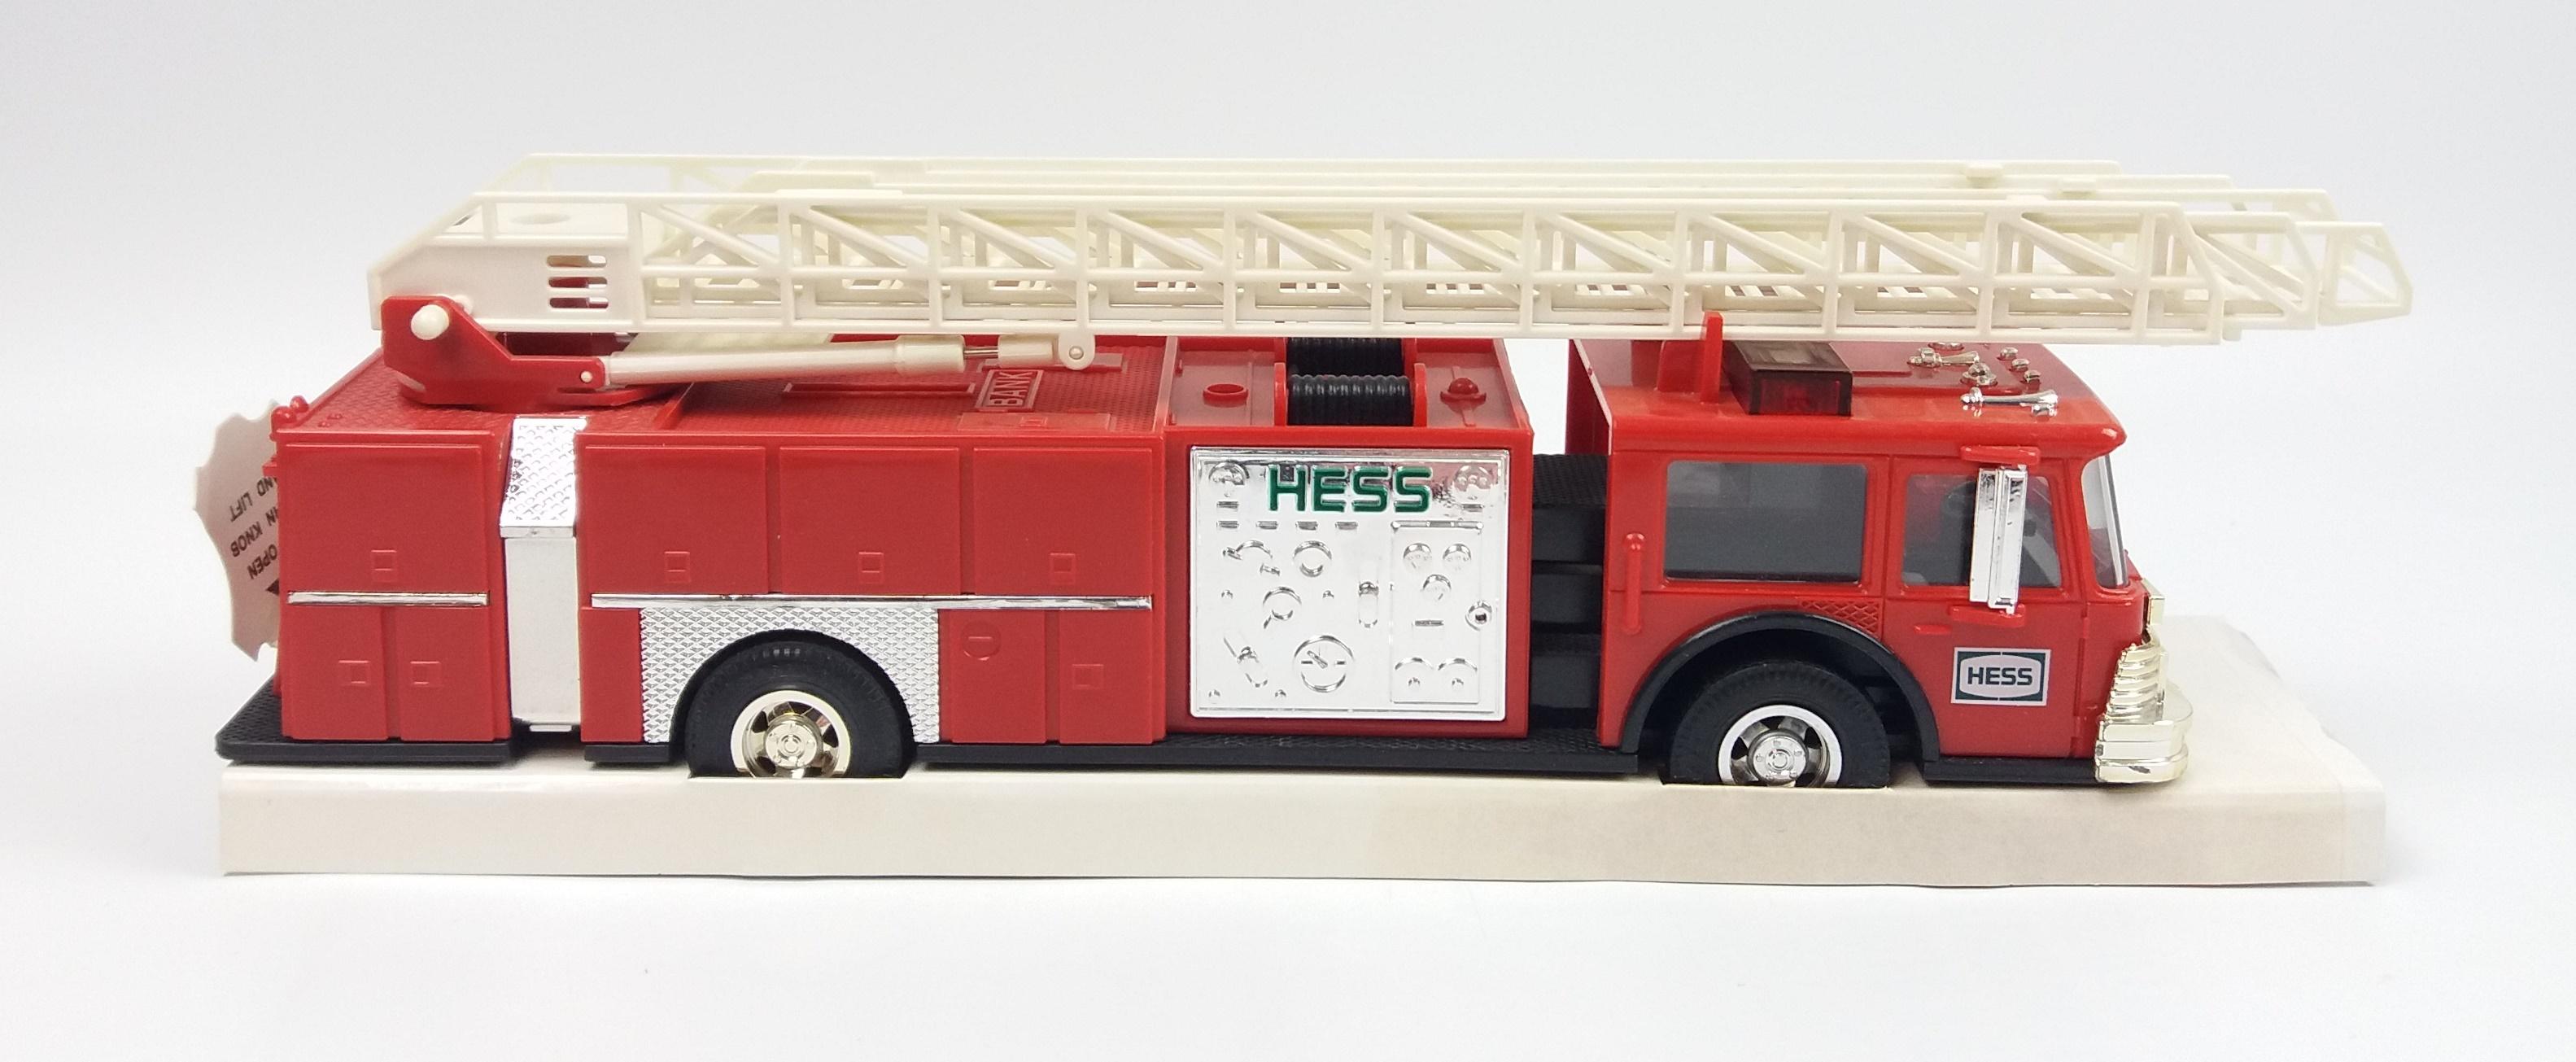 1986 Hess Truck Collectible in Packaging